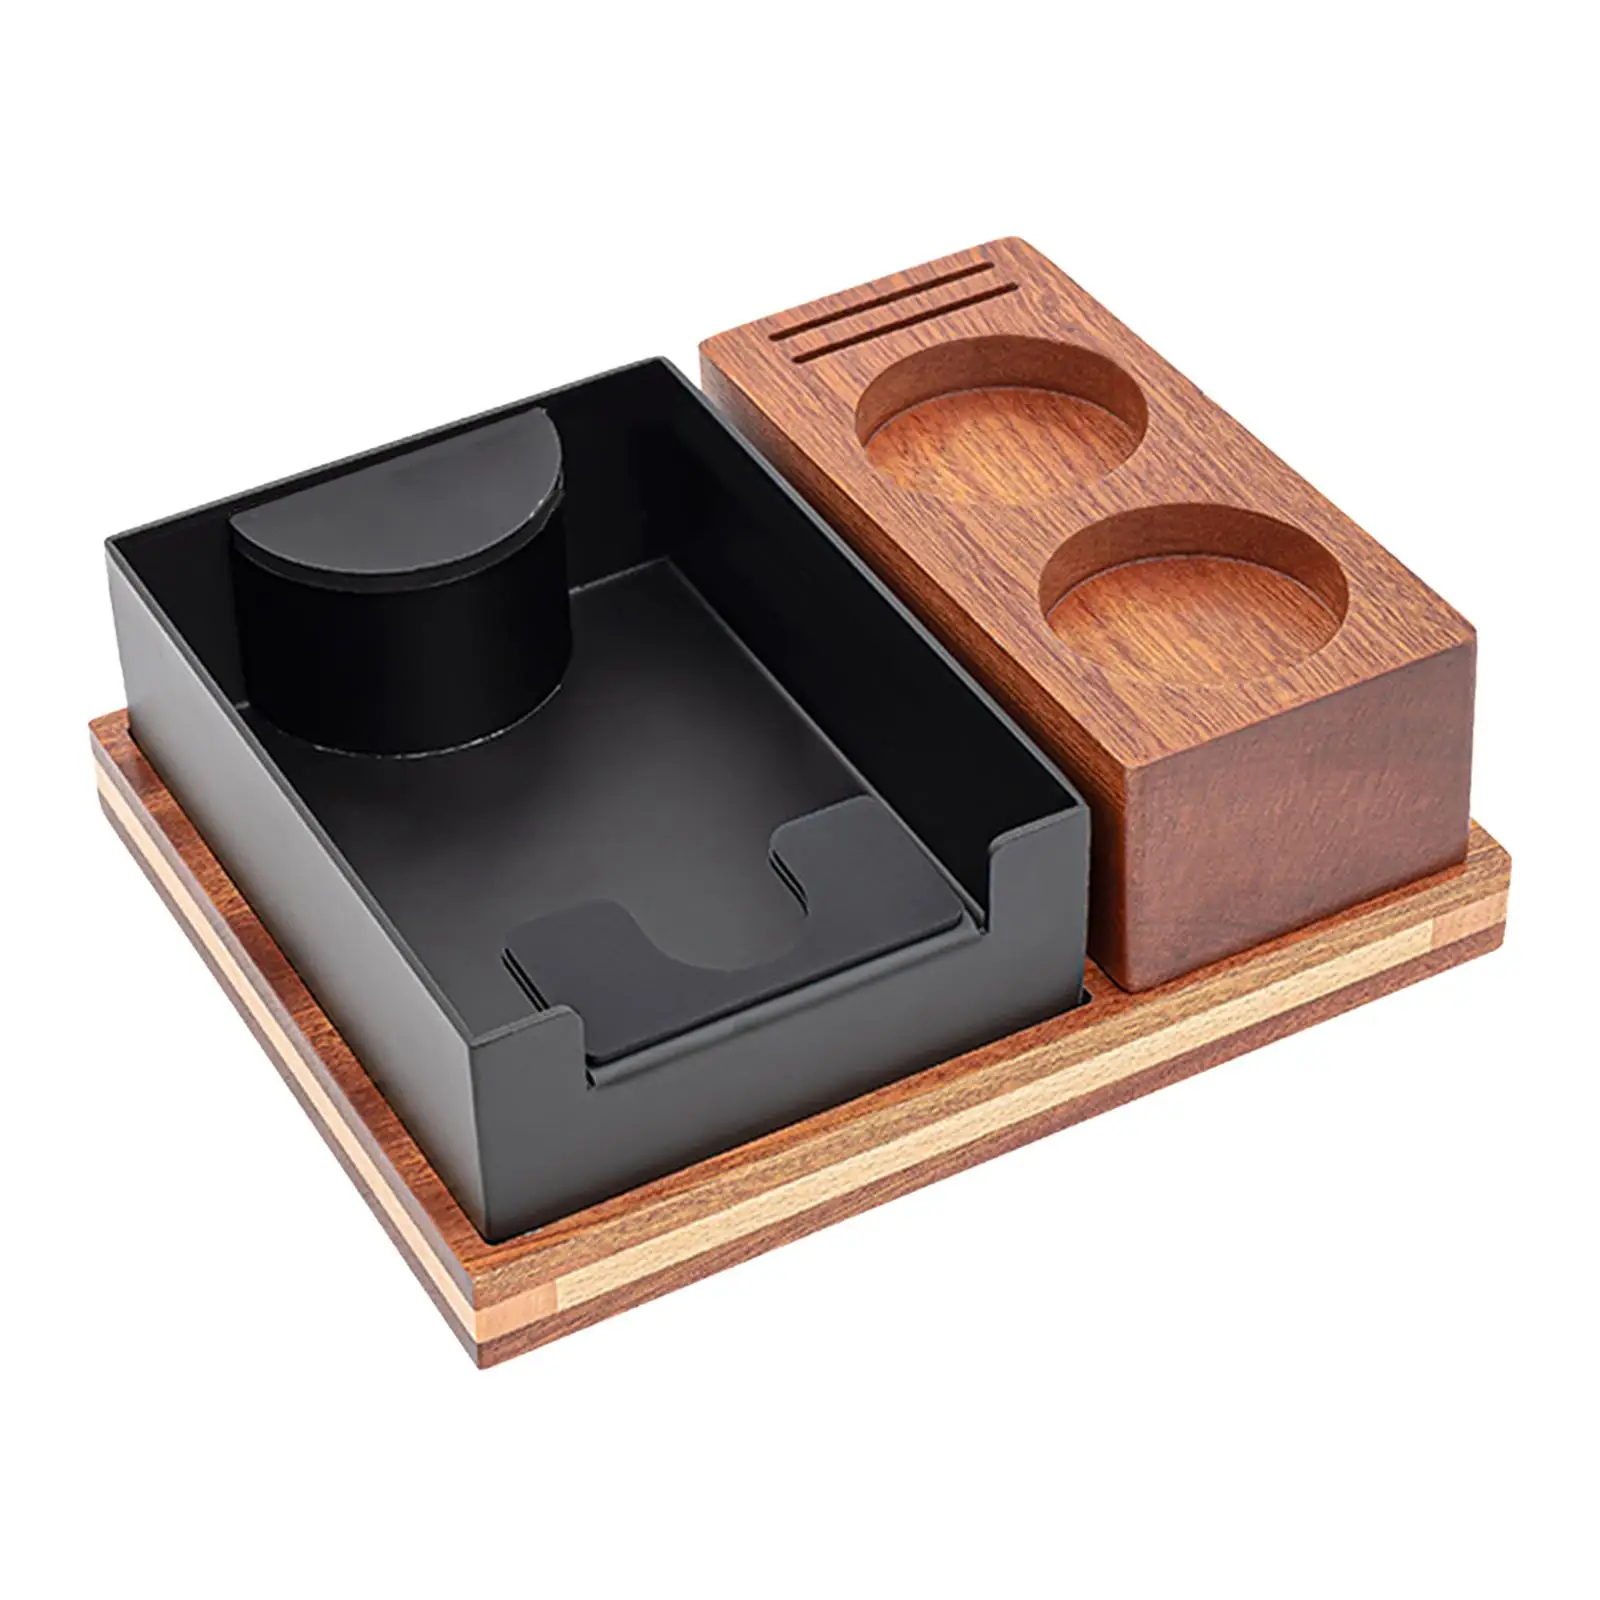 Coffee Grounds Box Wood Detachable Espresso Knock Box for Home Bar Household